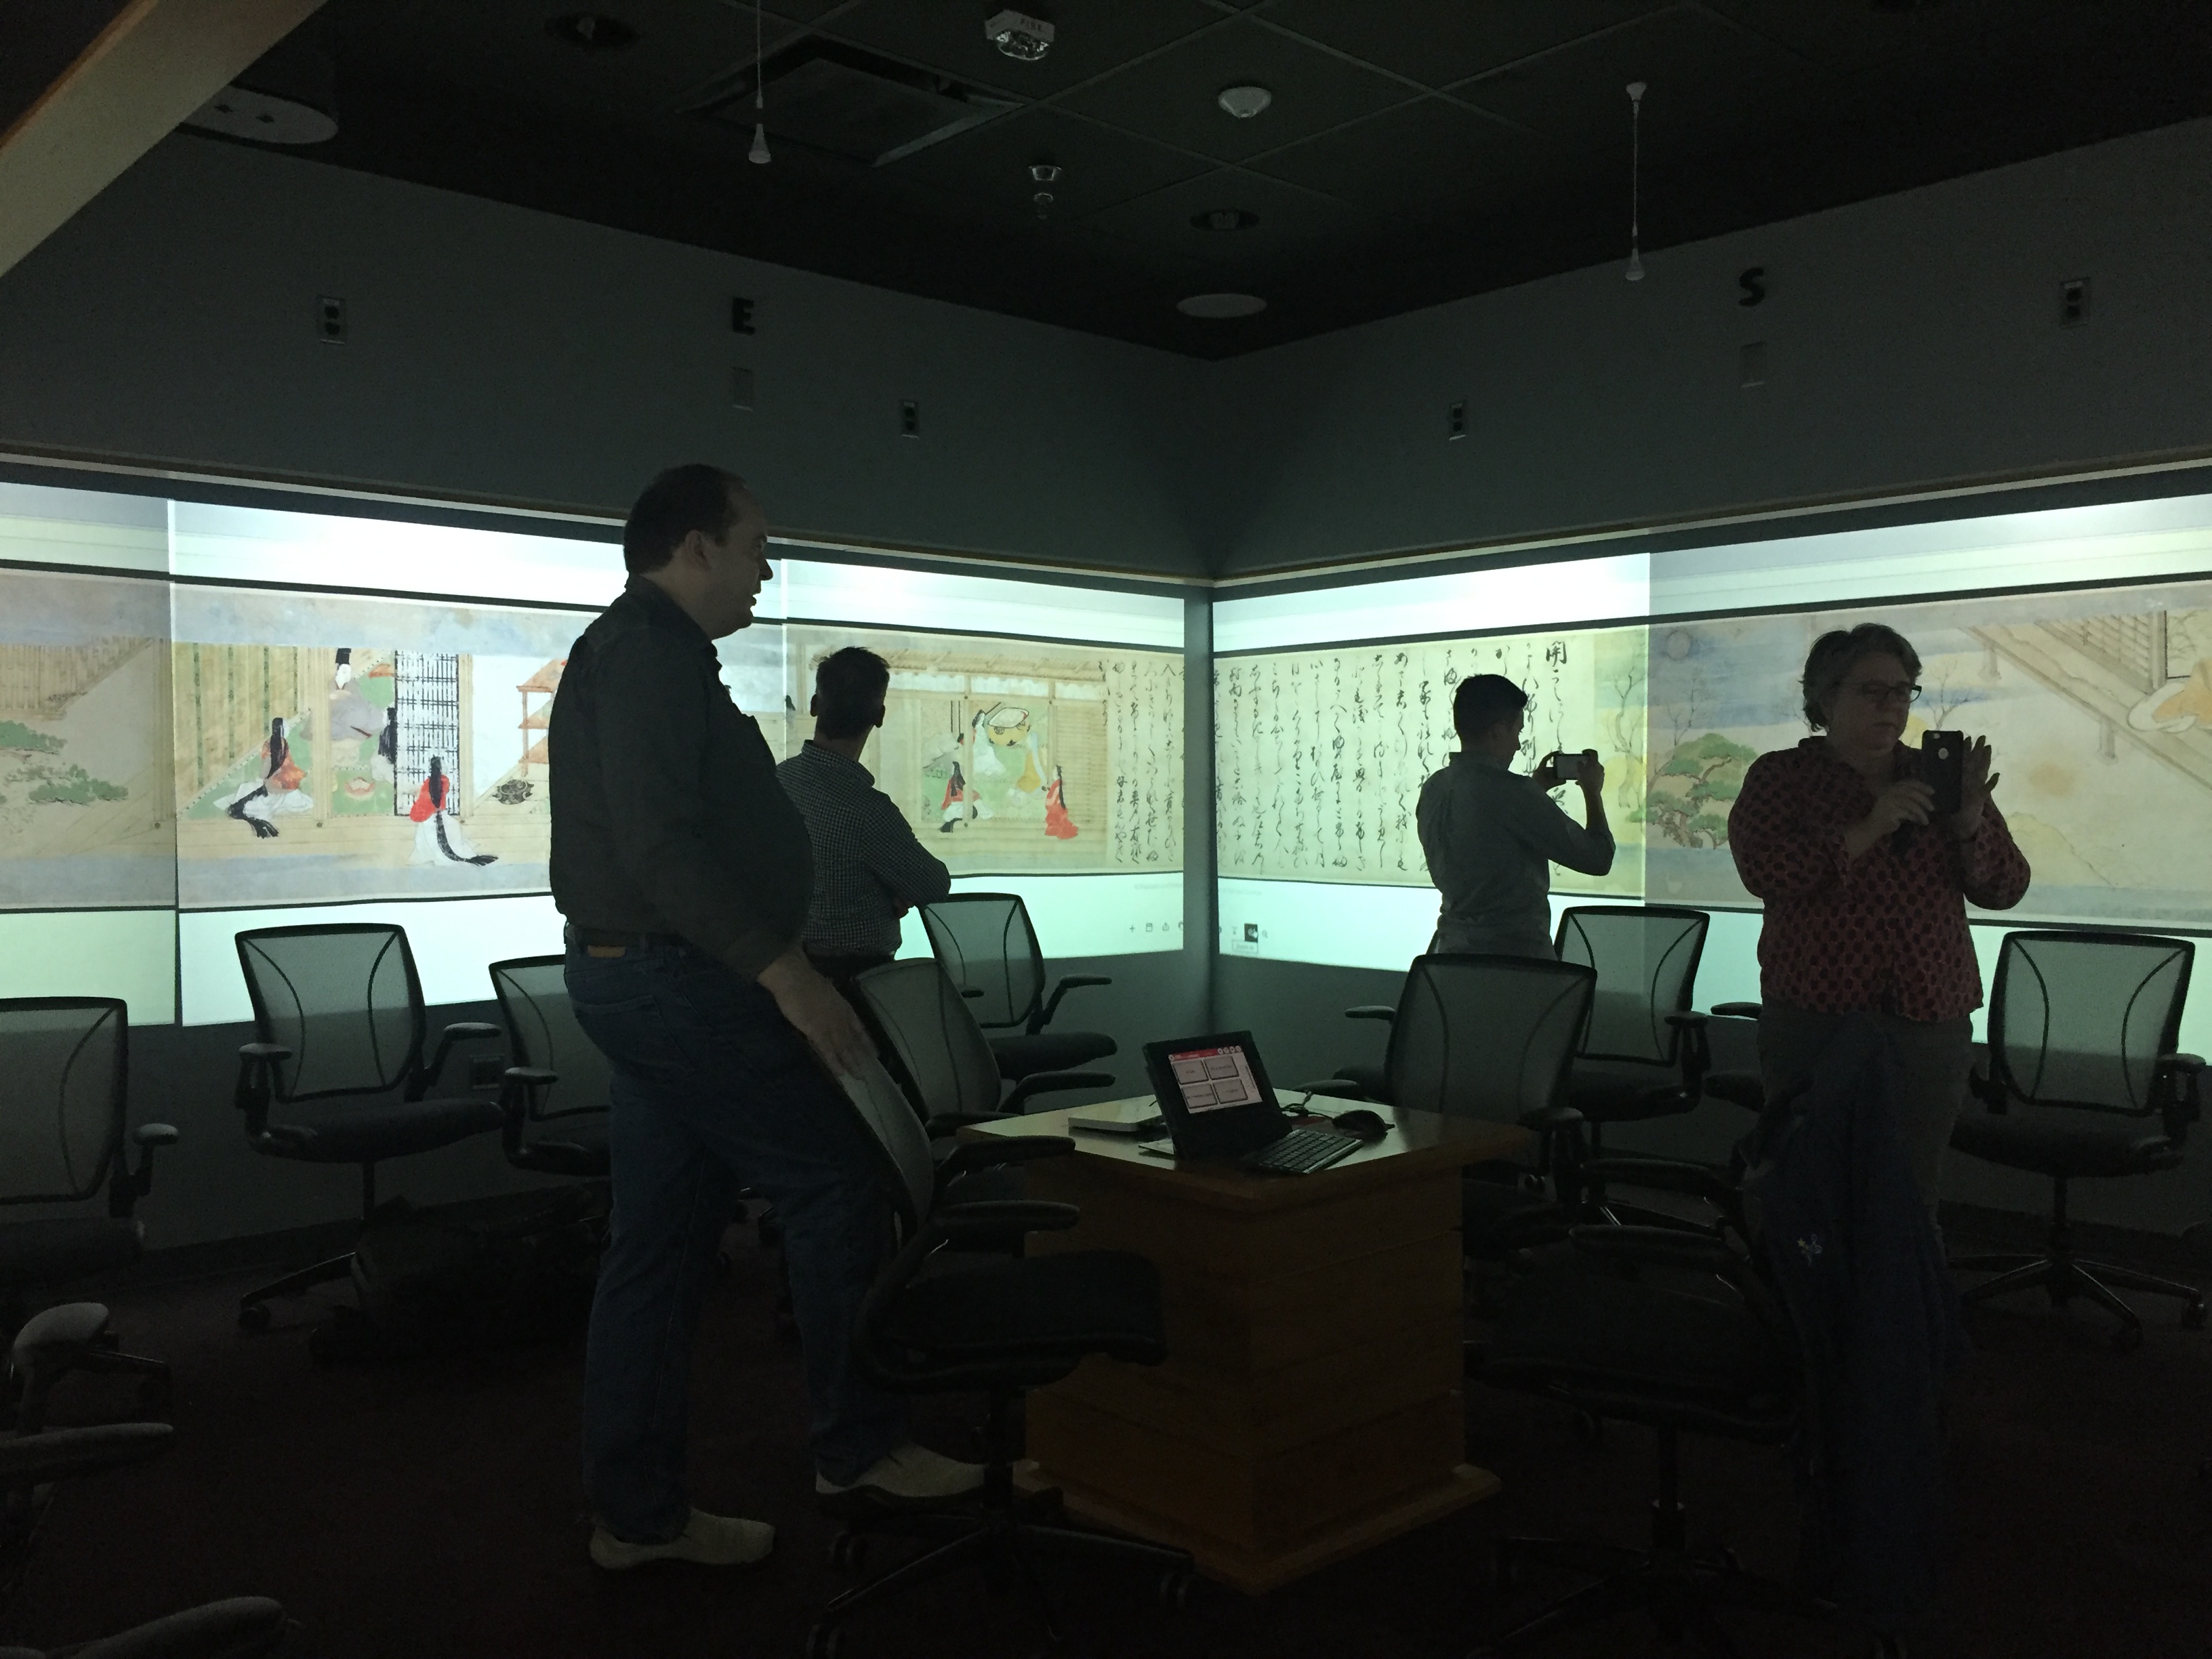 Harvard staff explore an interactive classroom with projectors displaying IIIF assets on all walls